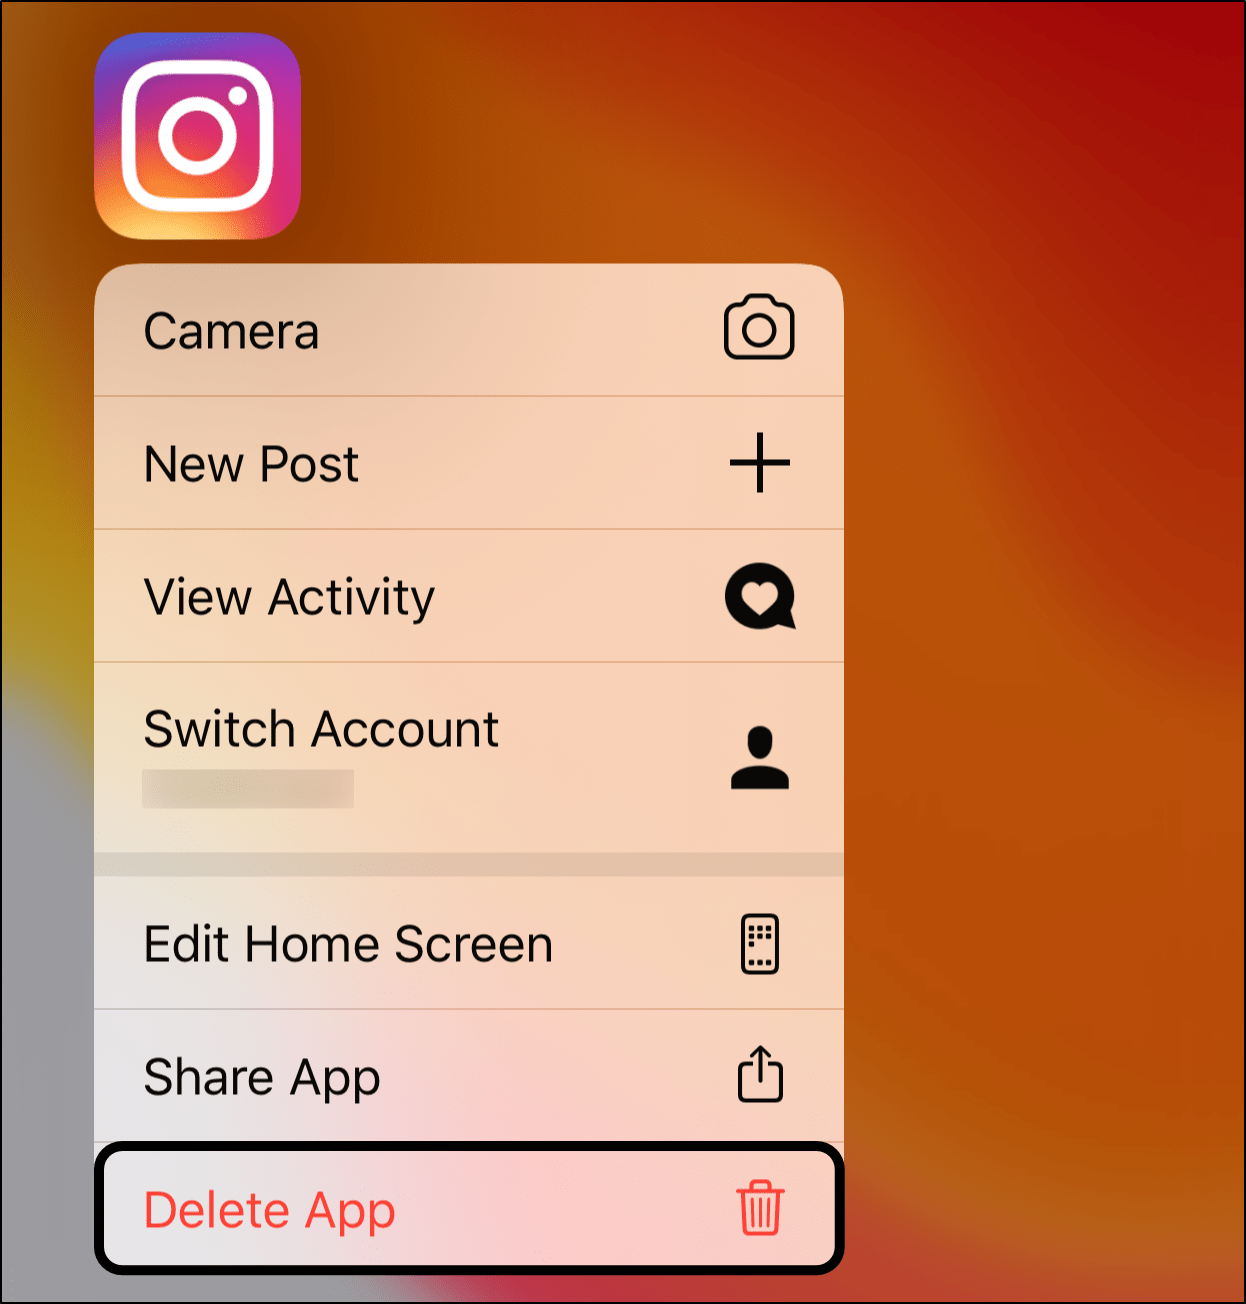 reinstall the instagram app on iOS or Android to fix Instagram post captions not showing up in feed